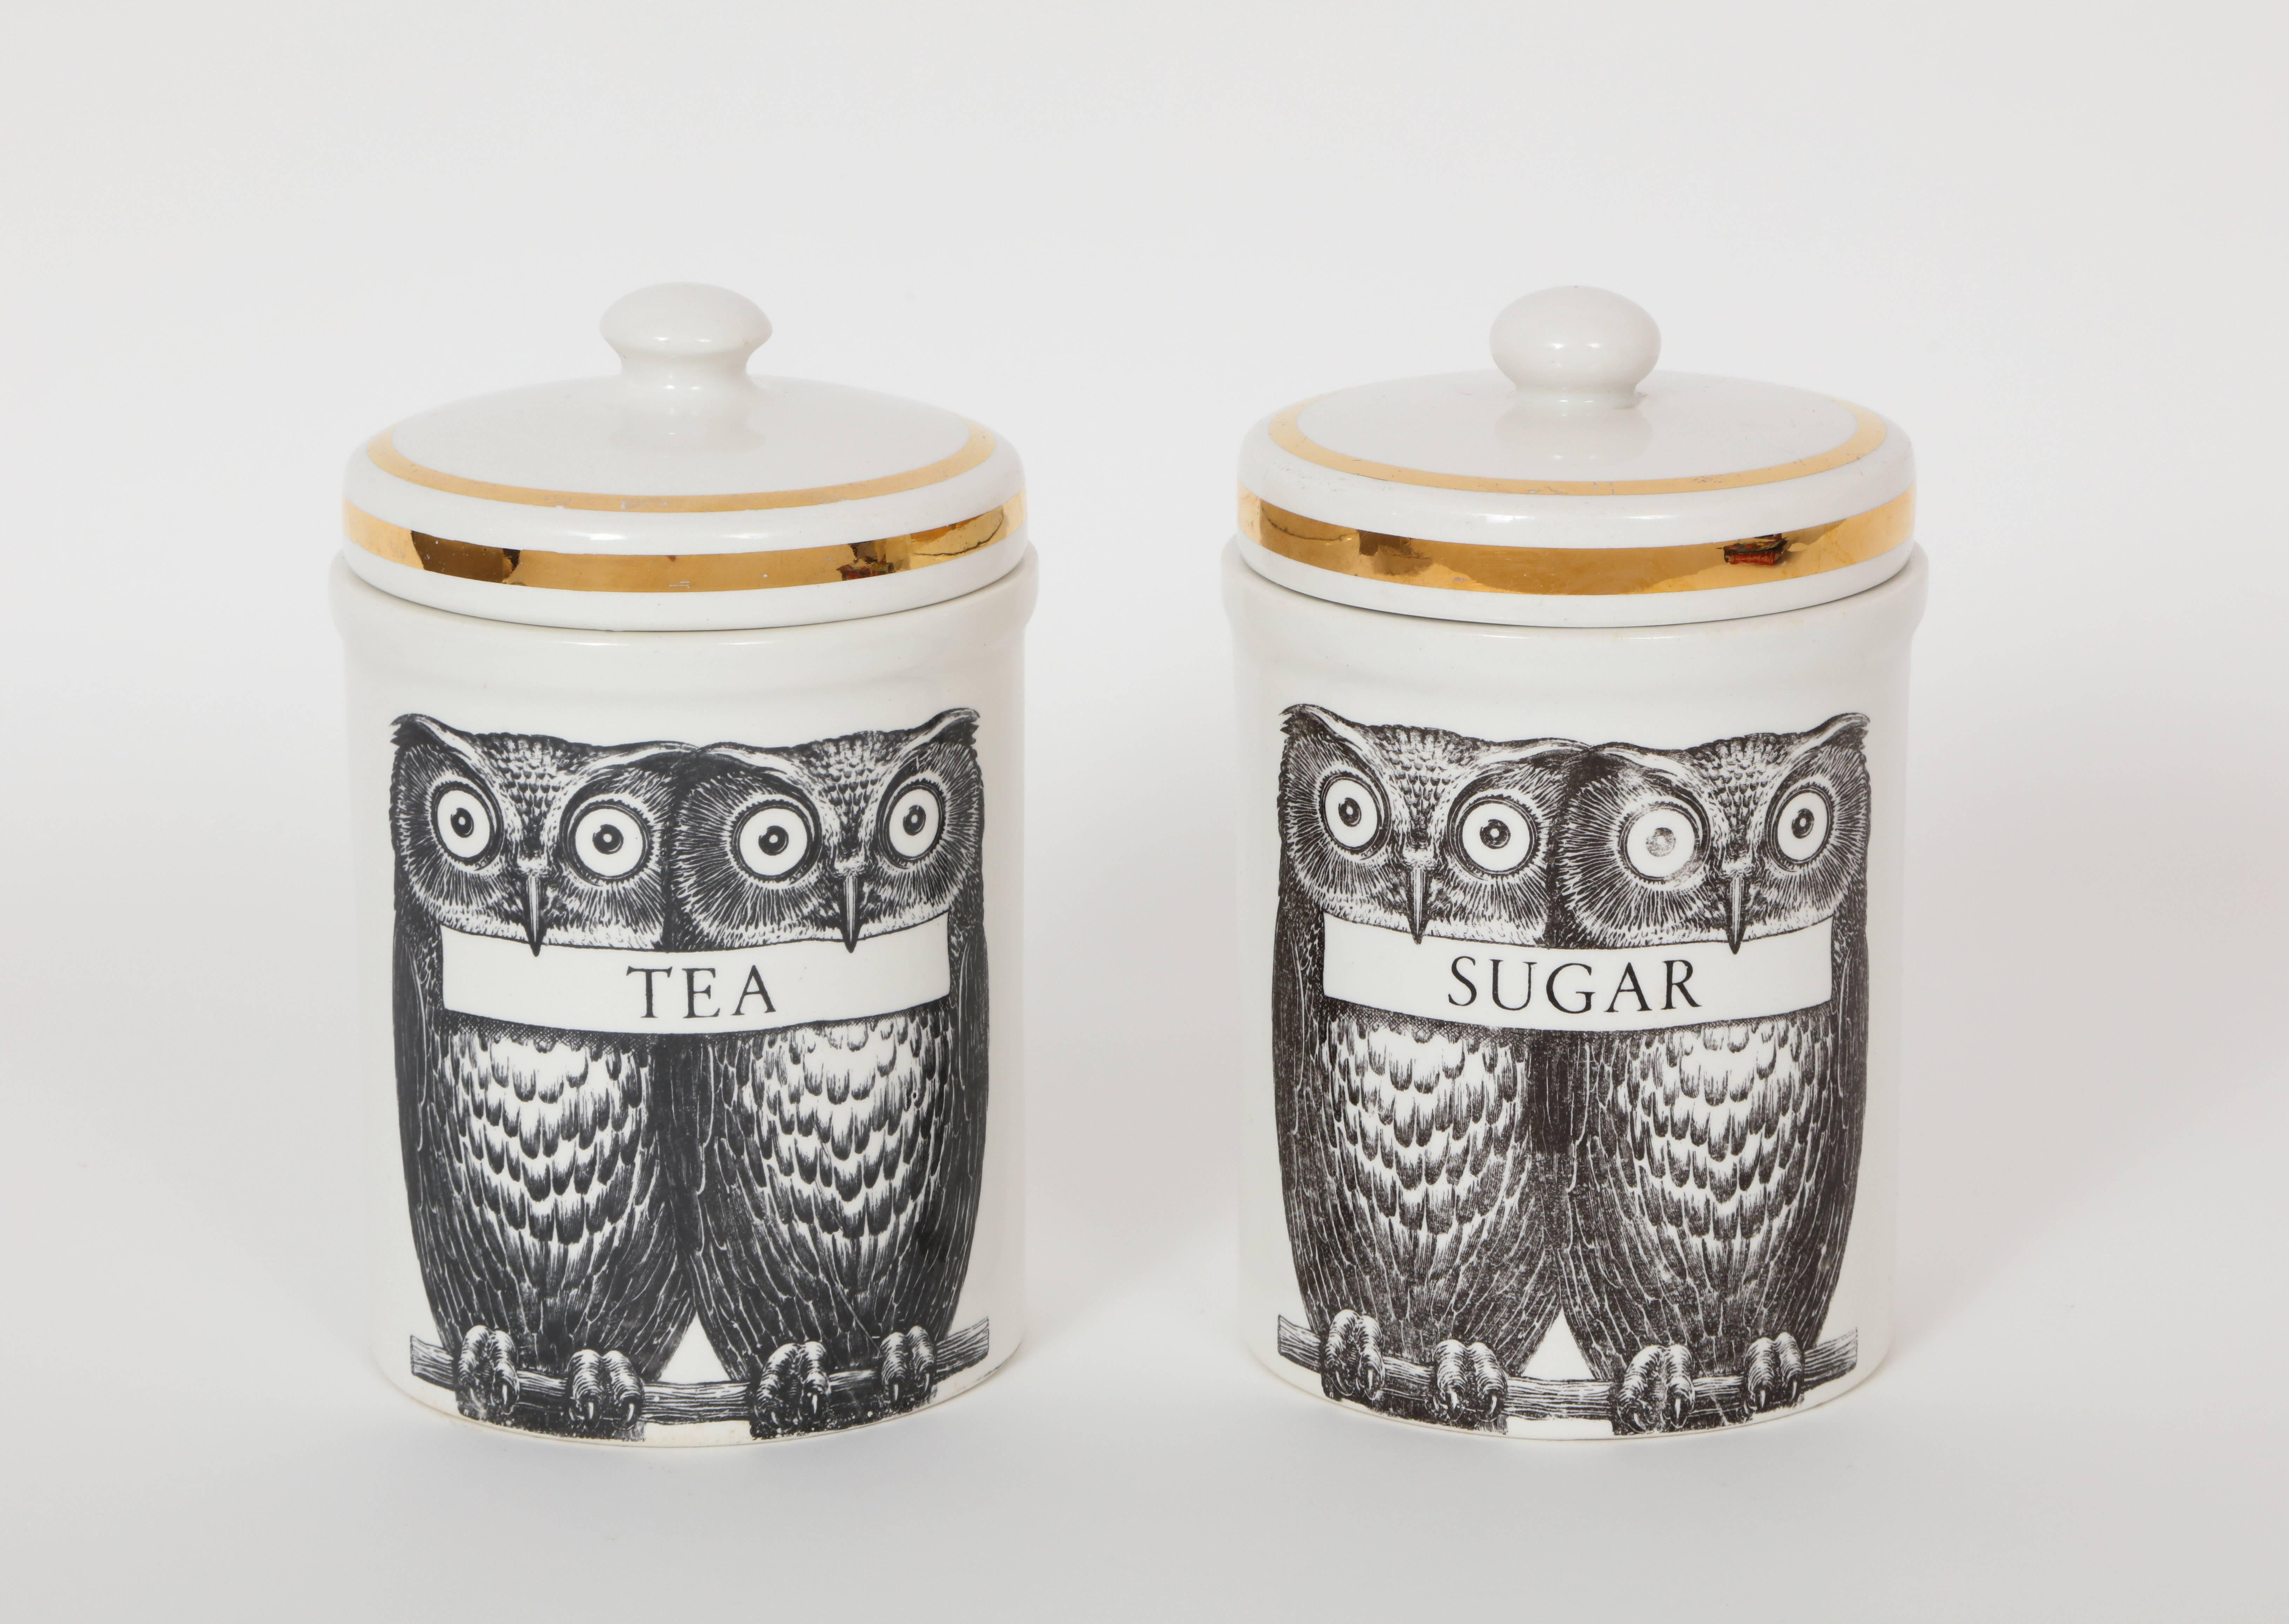 Fornasetti Porcelain Owl Canisters Tea and Sugar, Mid-Century 1950
Lovely vintage owl canisters,
Mid-Century.
Fornasetti.

12 inches height
7 inches diameter

Piero Fornasetti (10 November 1913 - 9 October 1988) was an Influential Mid